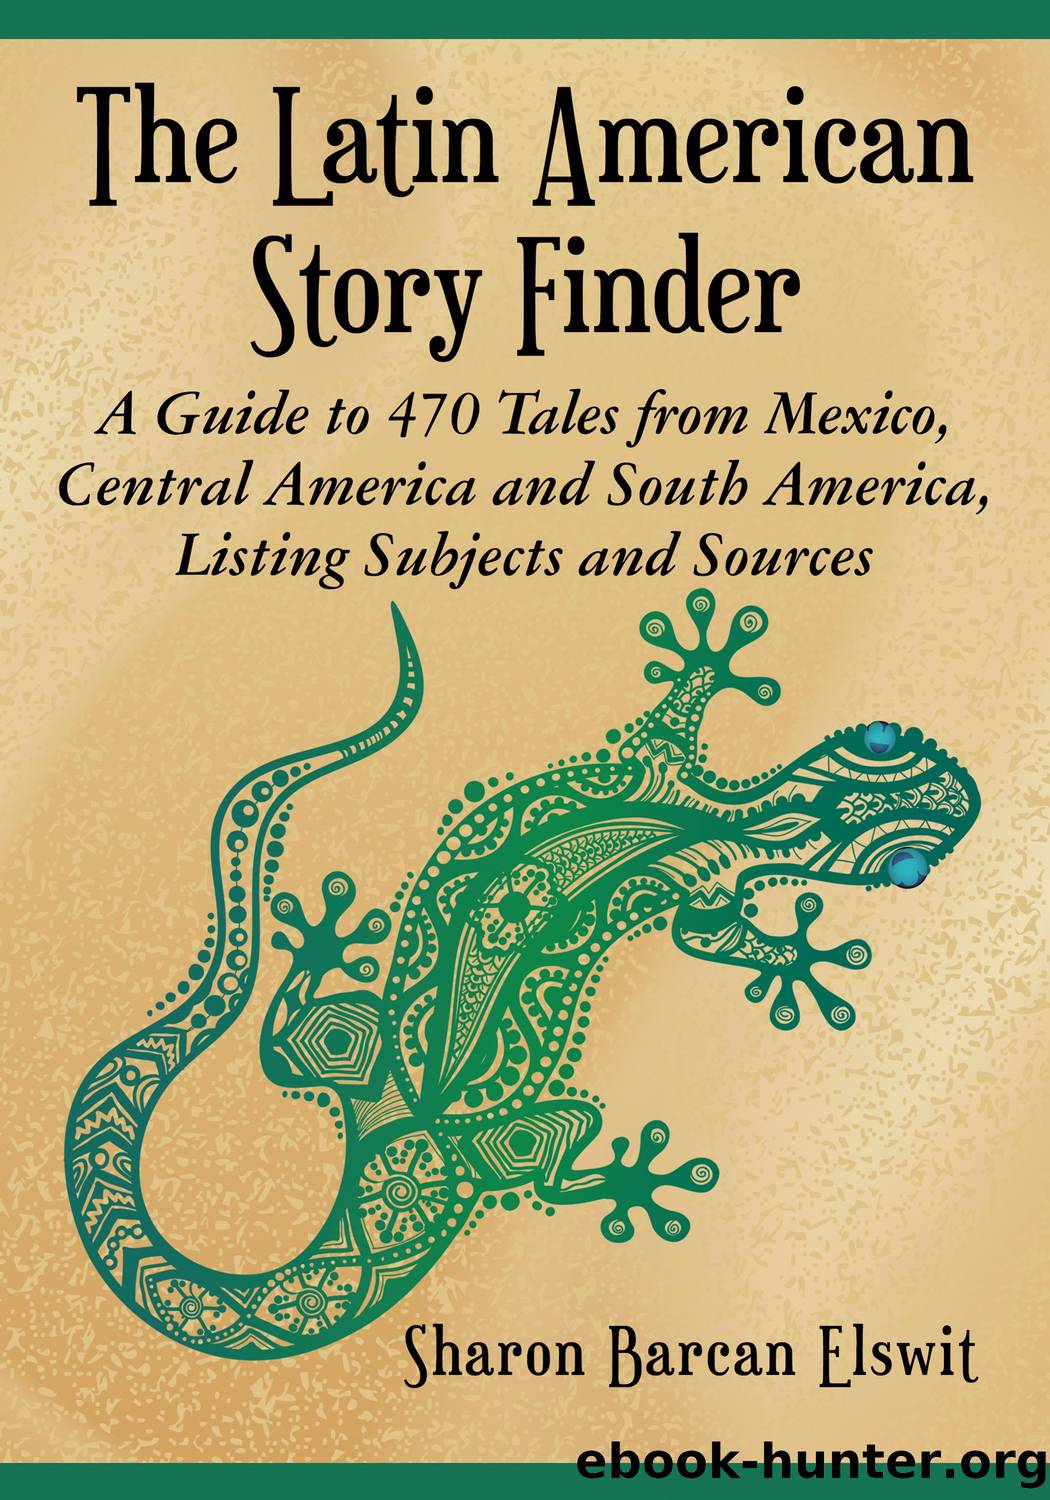 The Latin American Story Finder by Sharon Barcan Elswit